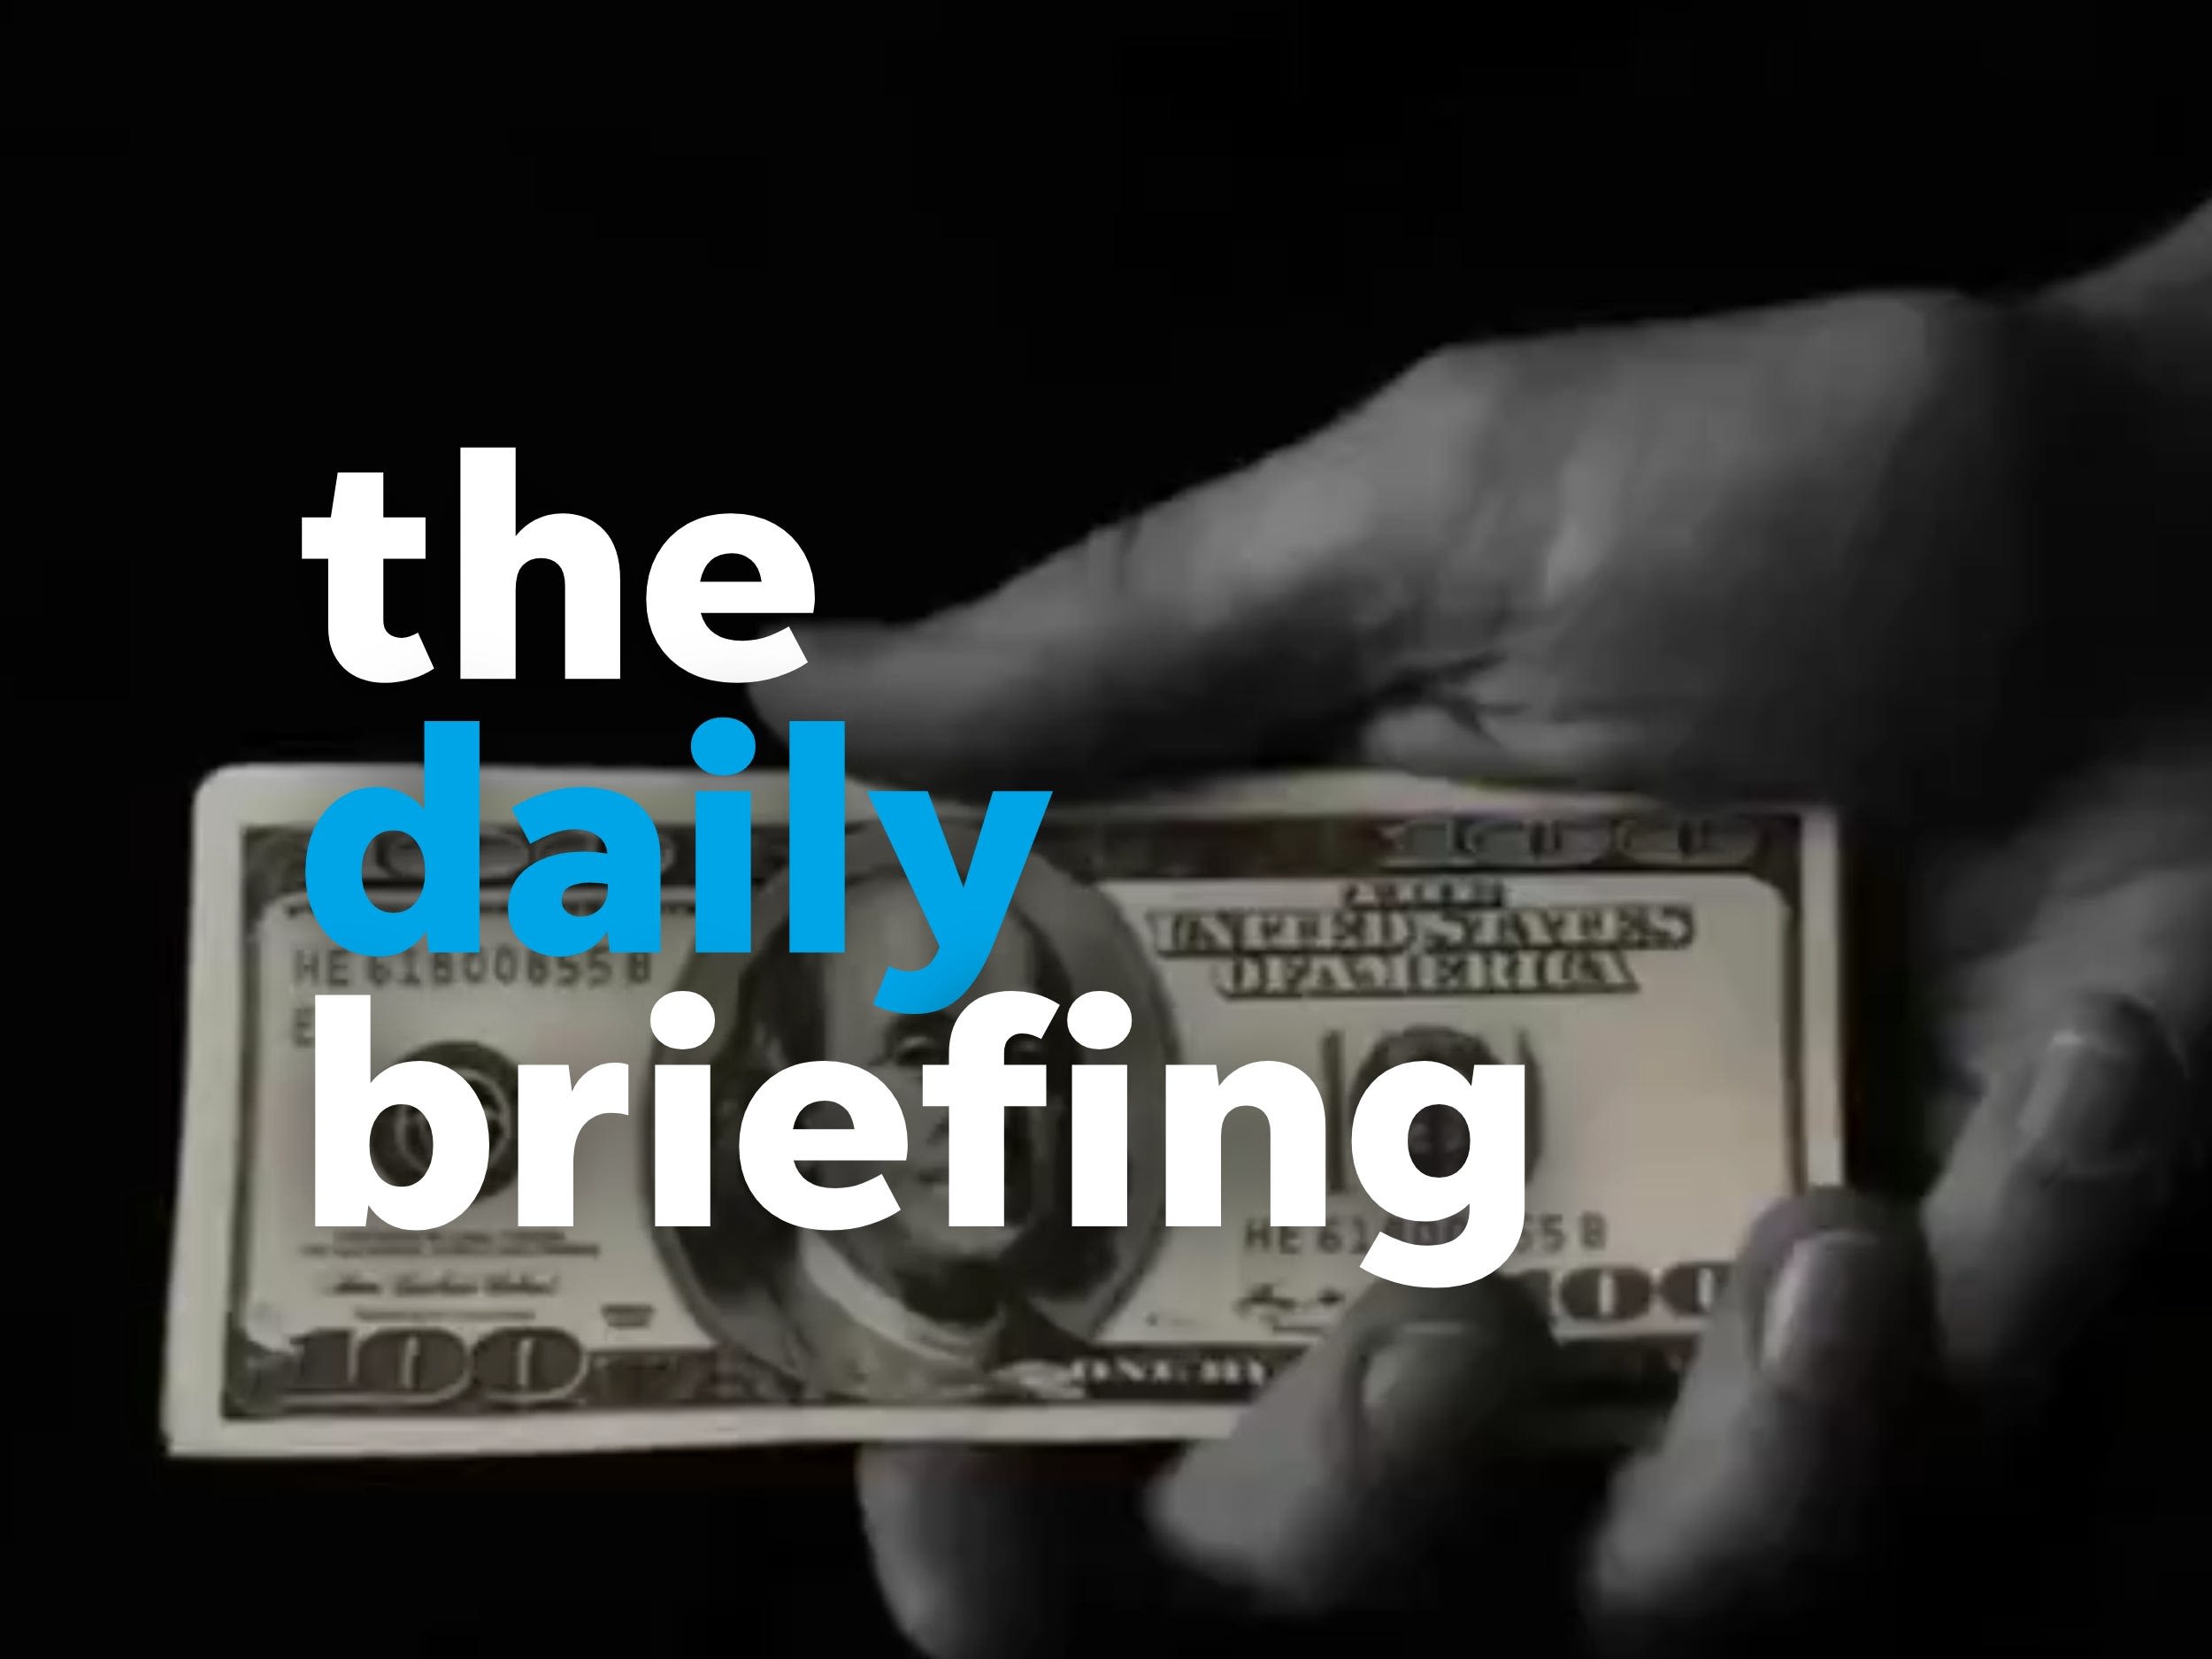 Ohio's still in the dark on dark money: Here are today's top stories | Daily Briefing